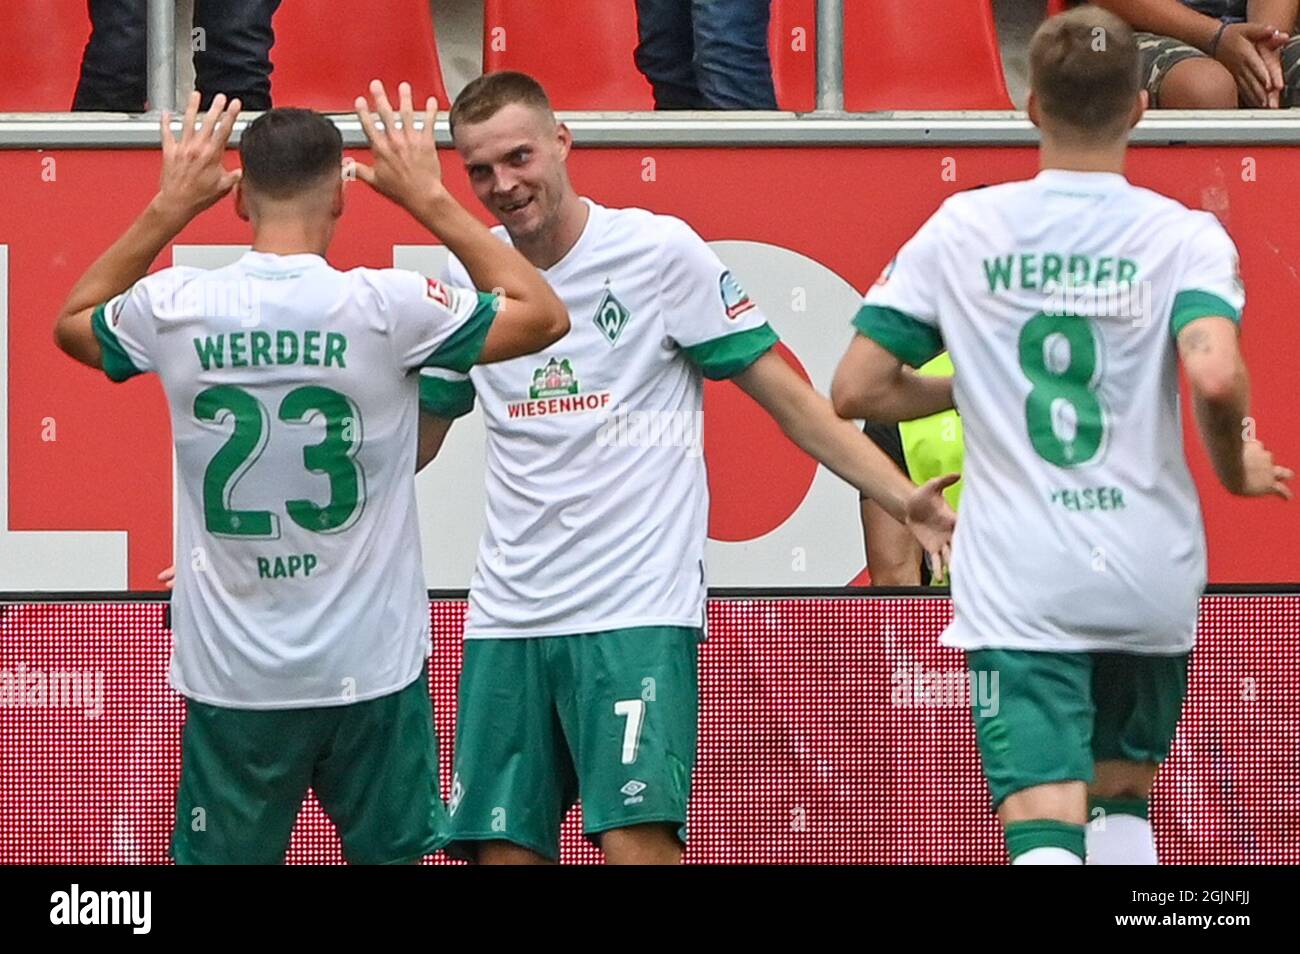 Ingolstadt, Germany. 11th Sep, 2021. Football: 2. Bundesliga, FC Ingolstadt 04 - Werder Bremen, Matchday 6, Audi Sportpark. Bremen's Marvin Ducksch (centre) celebrates with his team-mates Nicolai Rapp and Bremen's Mitchell Weiser after scoring the 0:3 against Ingolstadt. Credit: Armin Weigel/dpa - IMPORTANT NOTE: In accordance with the regulations of the DFL Deutsche Fußball Liga and/or the DFB Deutscher Fußball-Bund, it is prohibited to use or have used photographs taken in the stadium and/or of the match in the form of sequence pictures and/or video-like photo series./dpa/Alamy Live News Stock Photo